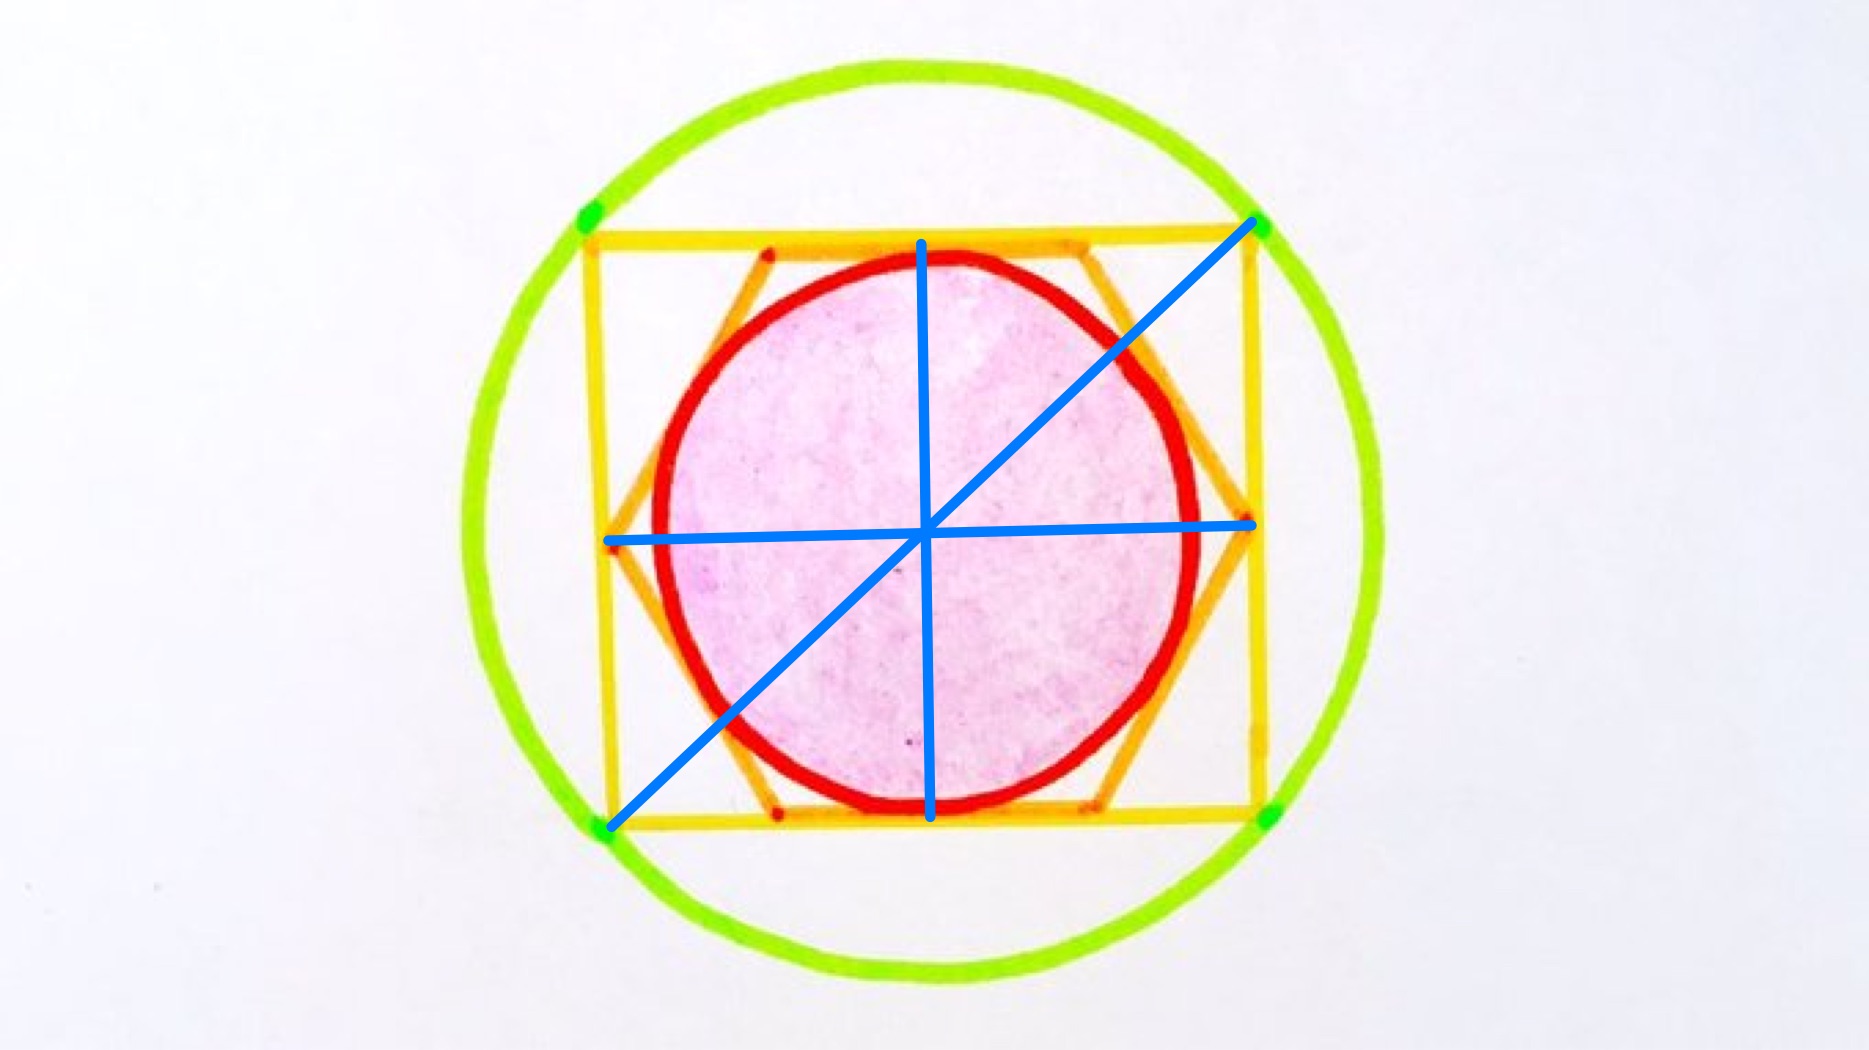 Nested circles and polygons labelled